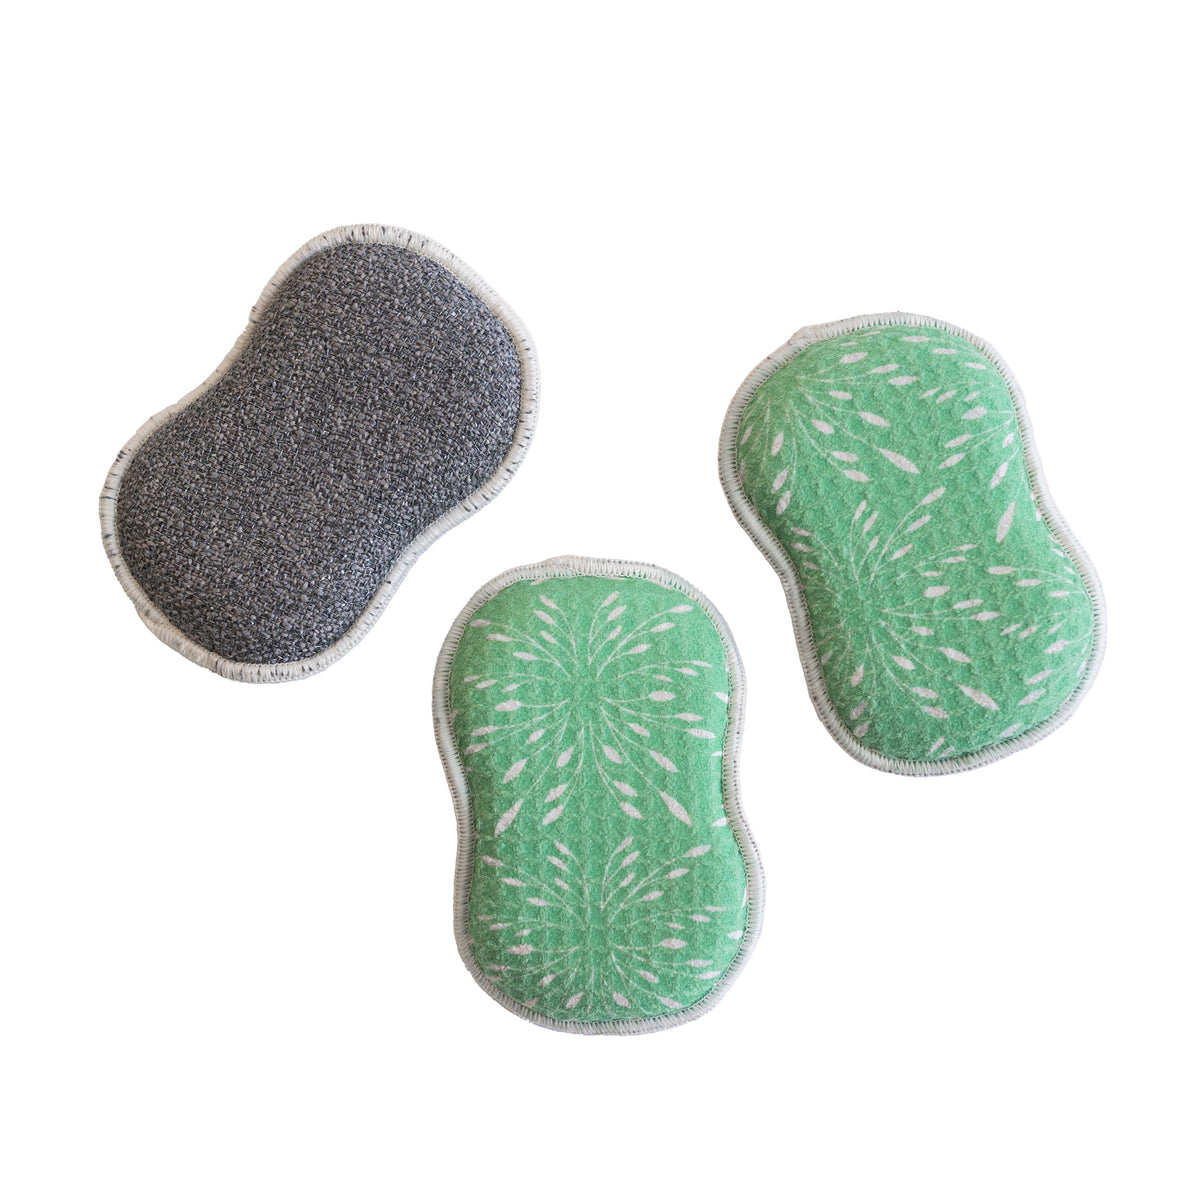 RE:usable Sponges (Set of 3) - RJW New Bloom Sponges &amp; Scouring Pads Once Again Home Co.   